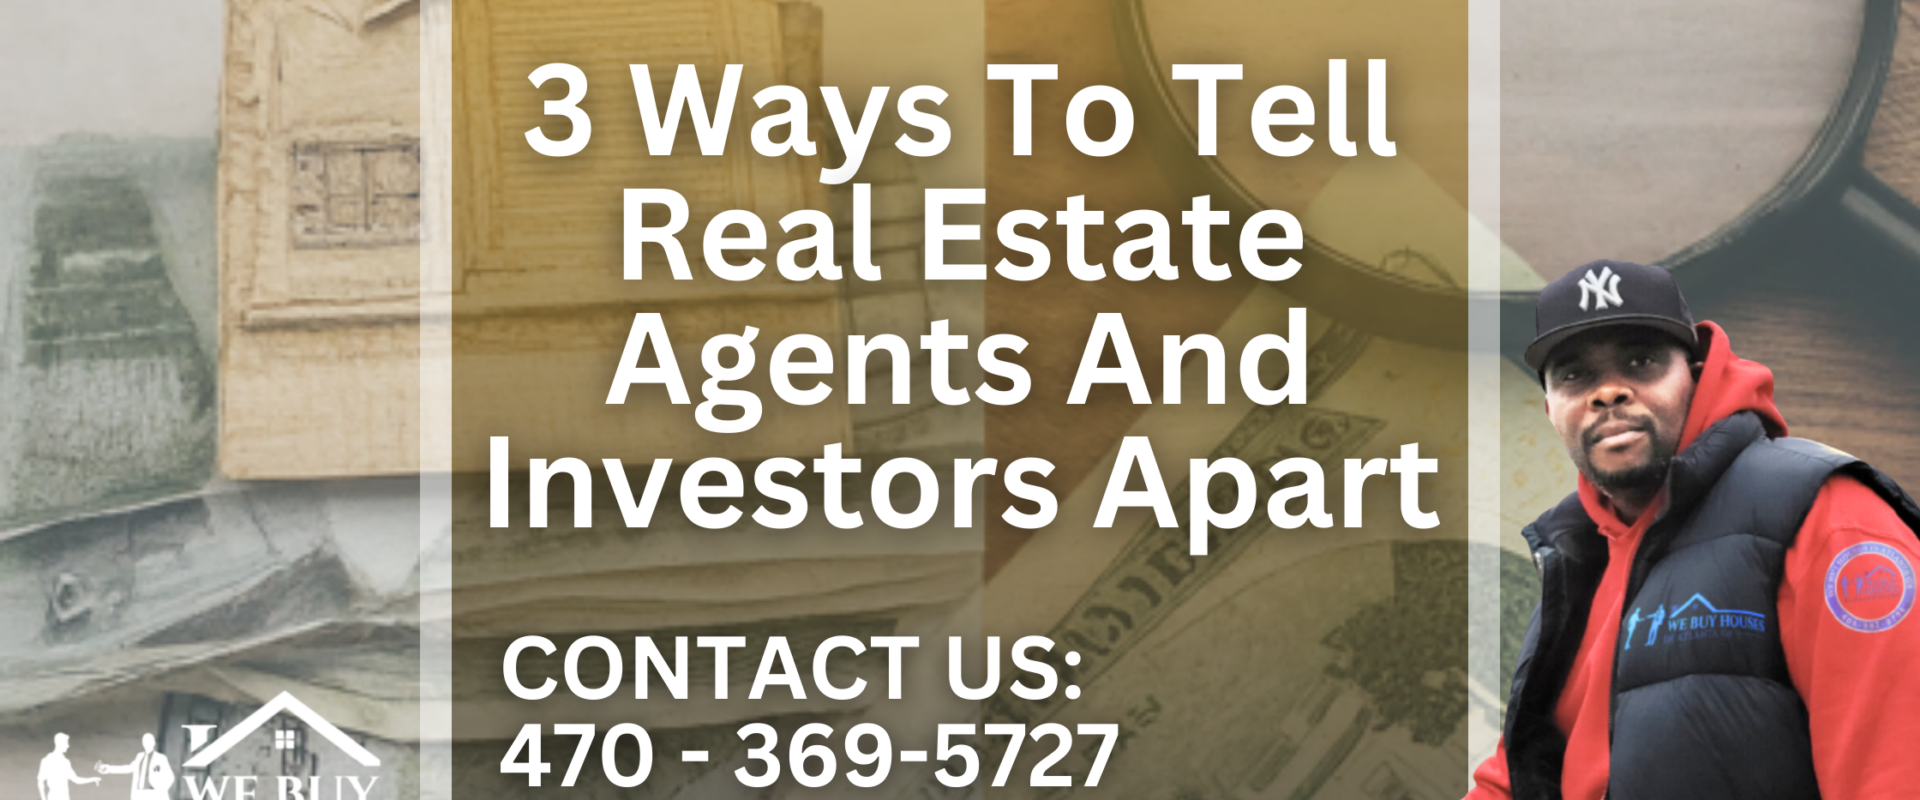 3 Ways To Tell Real Estate Agents And Investors Apart